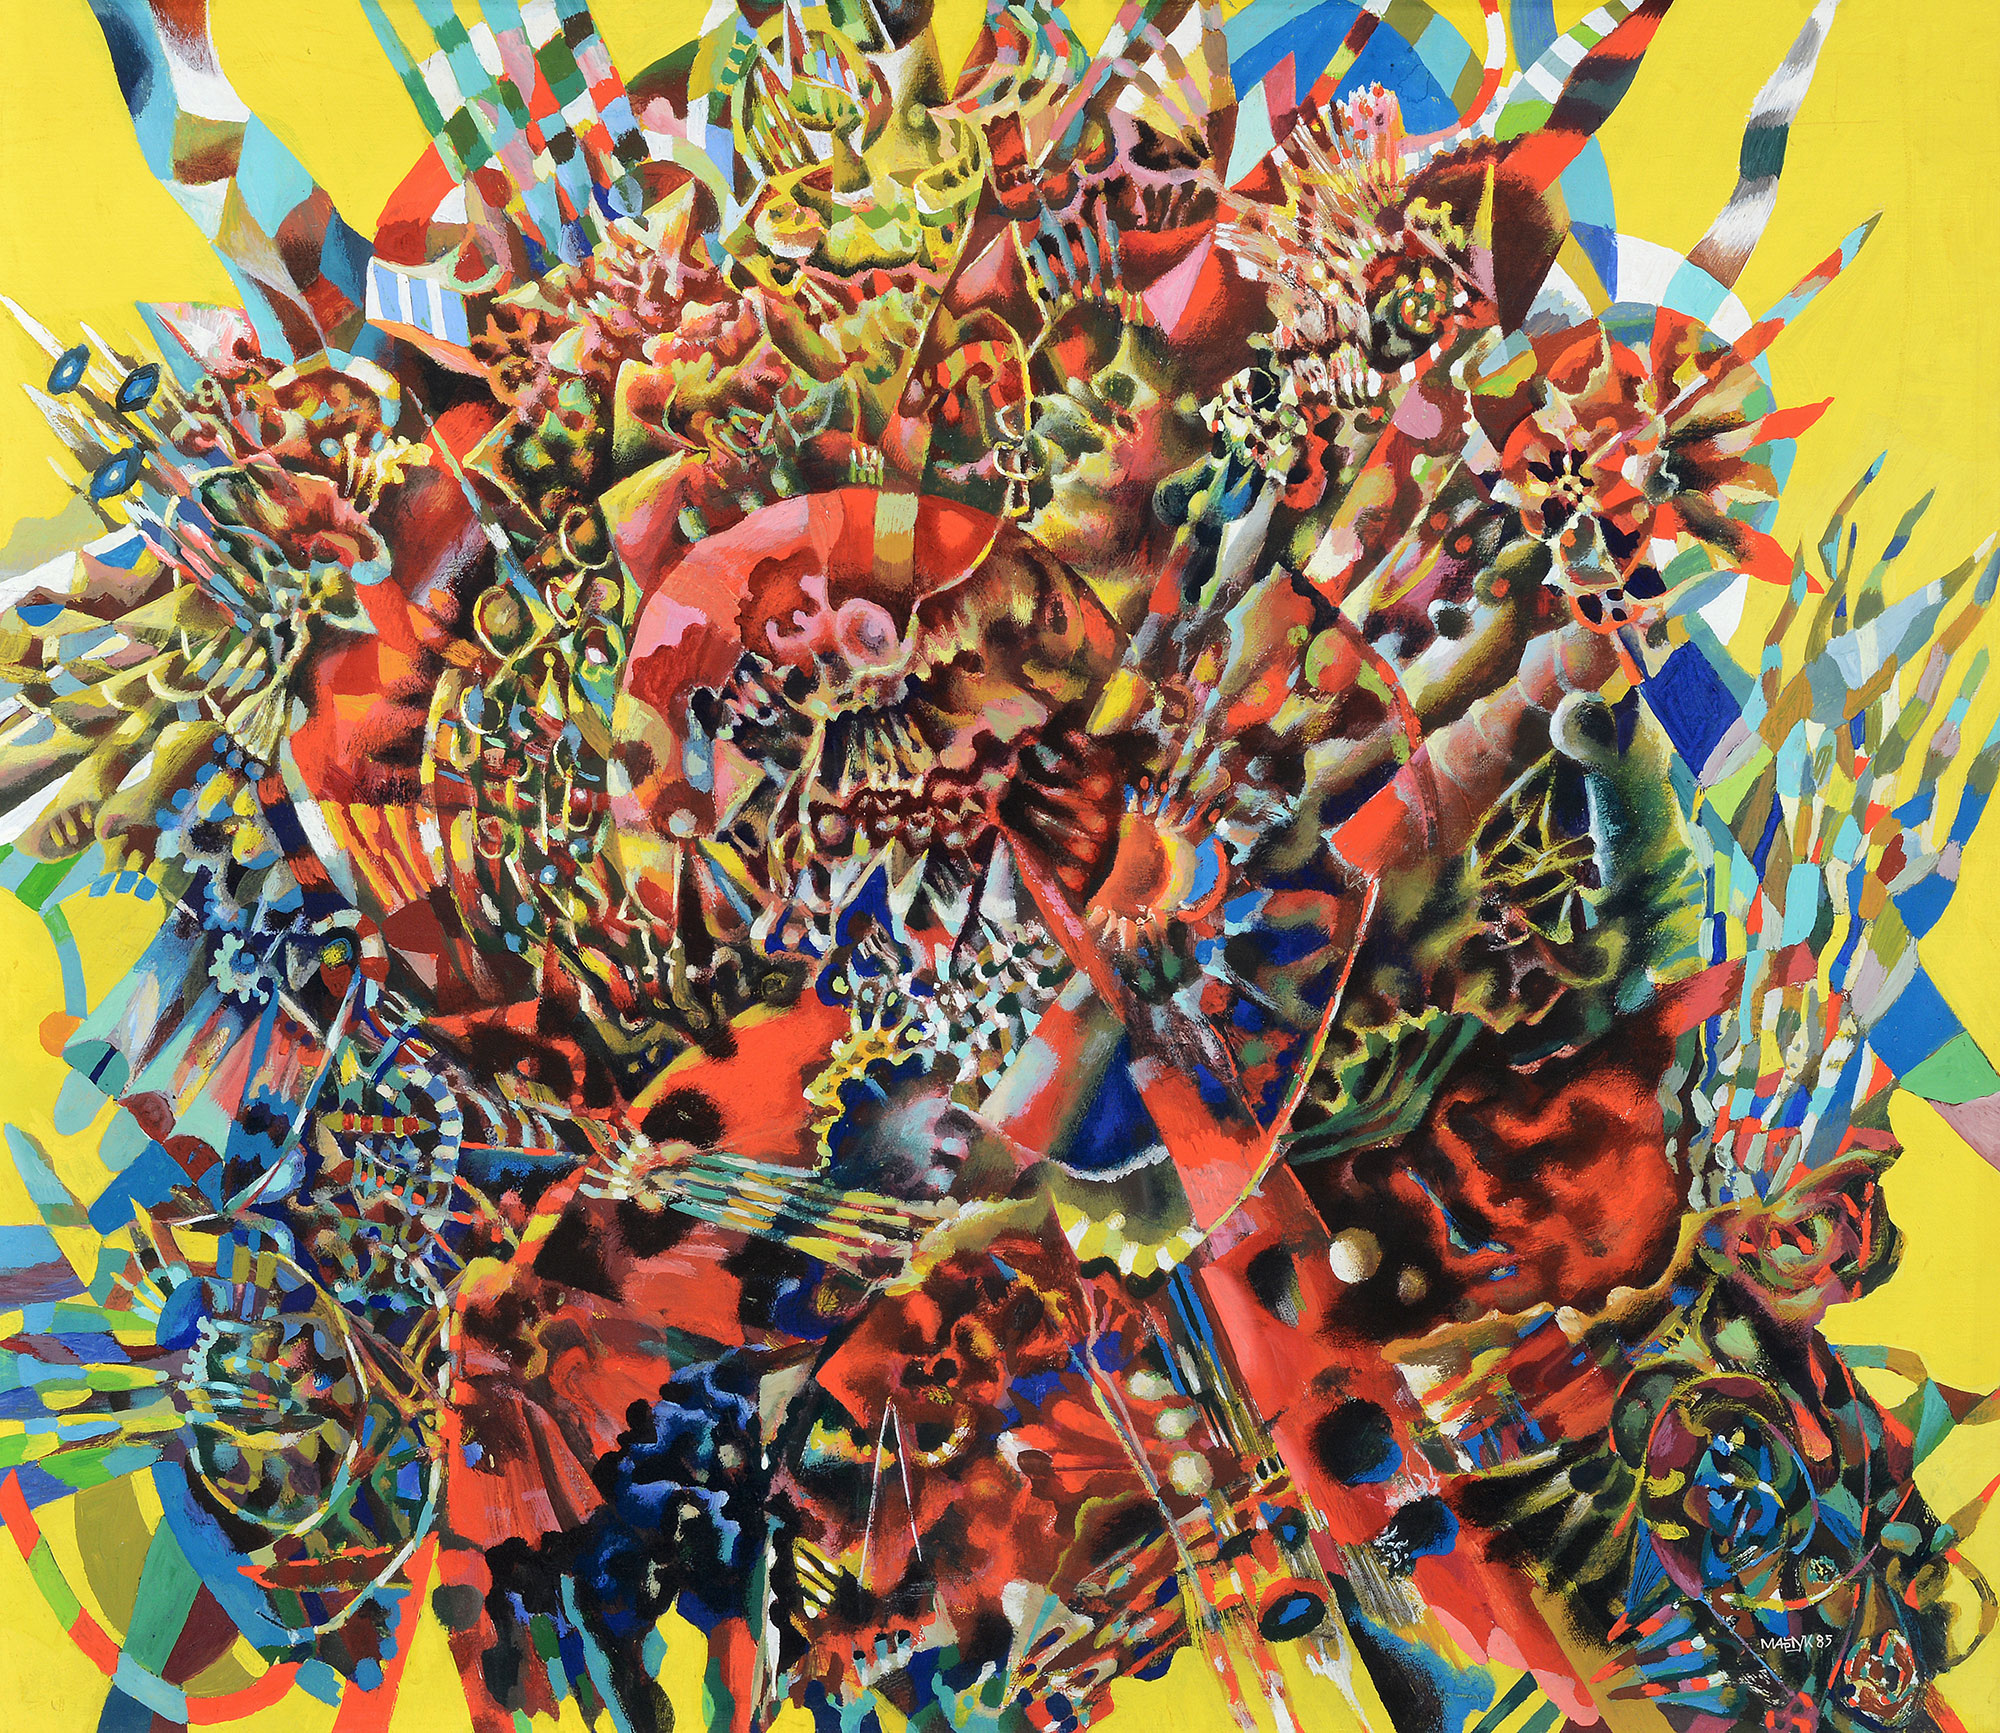 "Flowering planet", from the cycle "Blooming", 1985